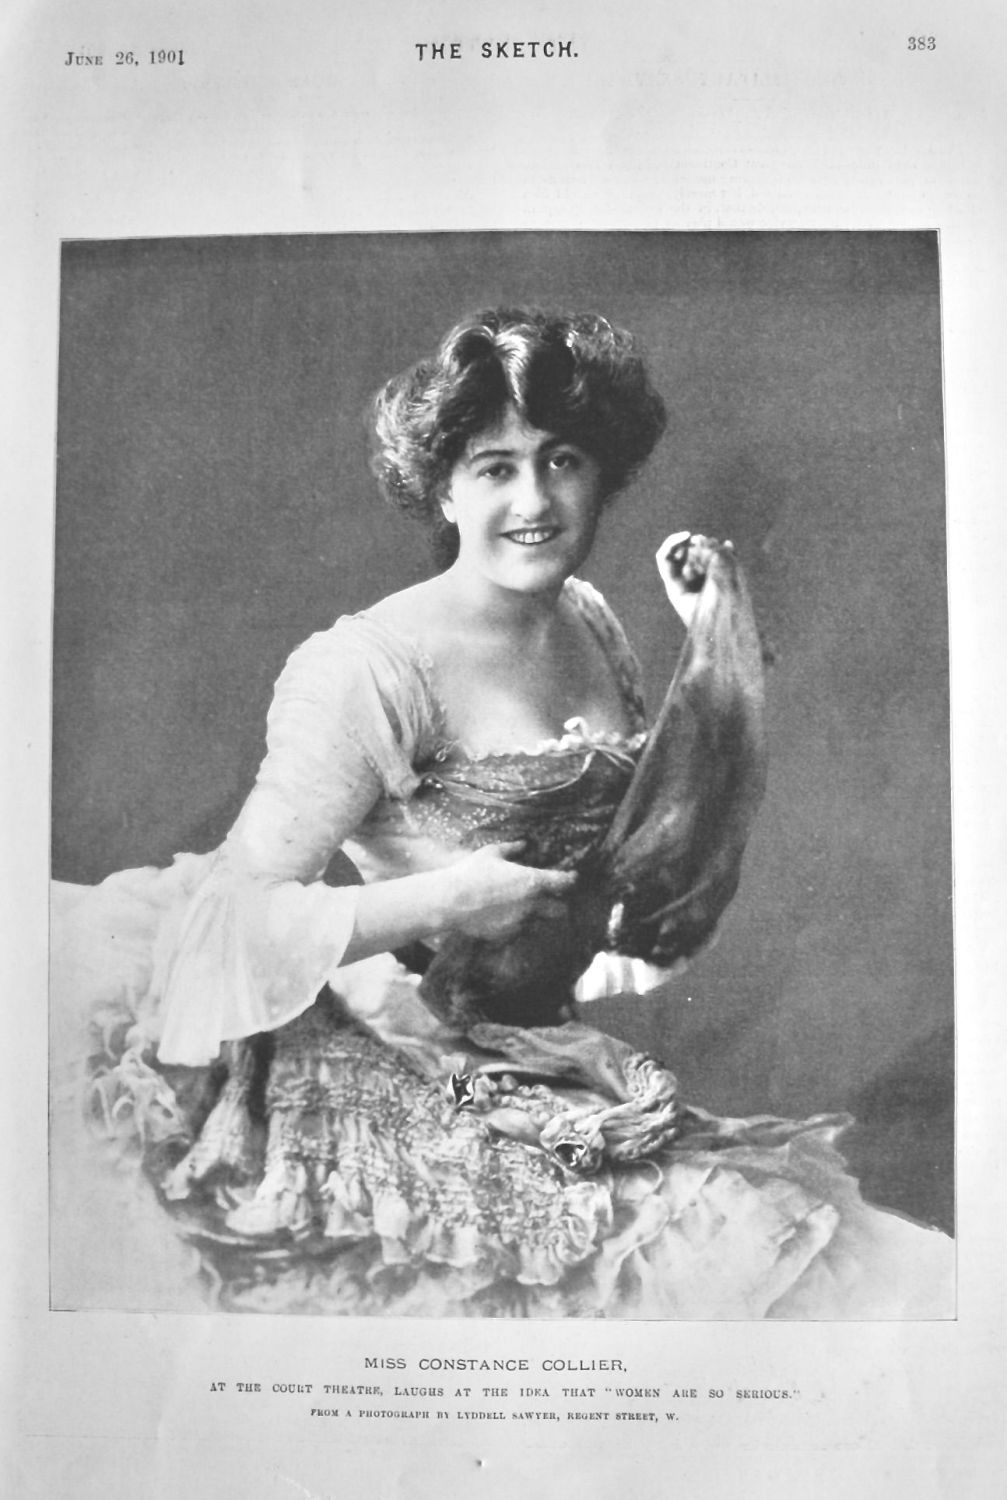 Miss Constance Collier, at the Court Theatre, Laughs at the Idea that 